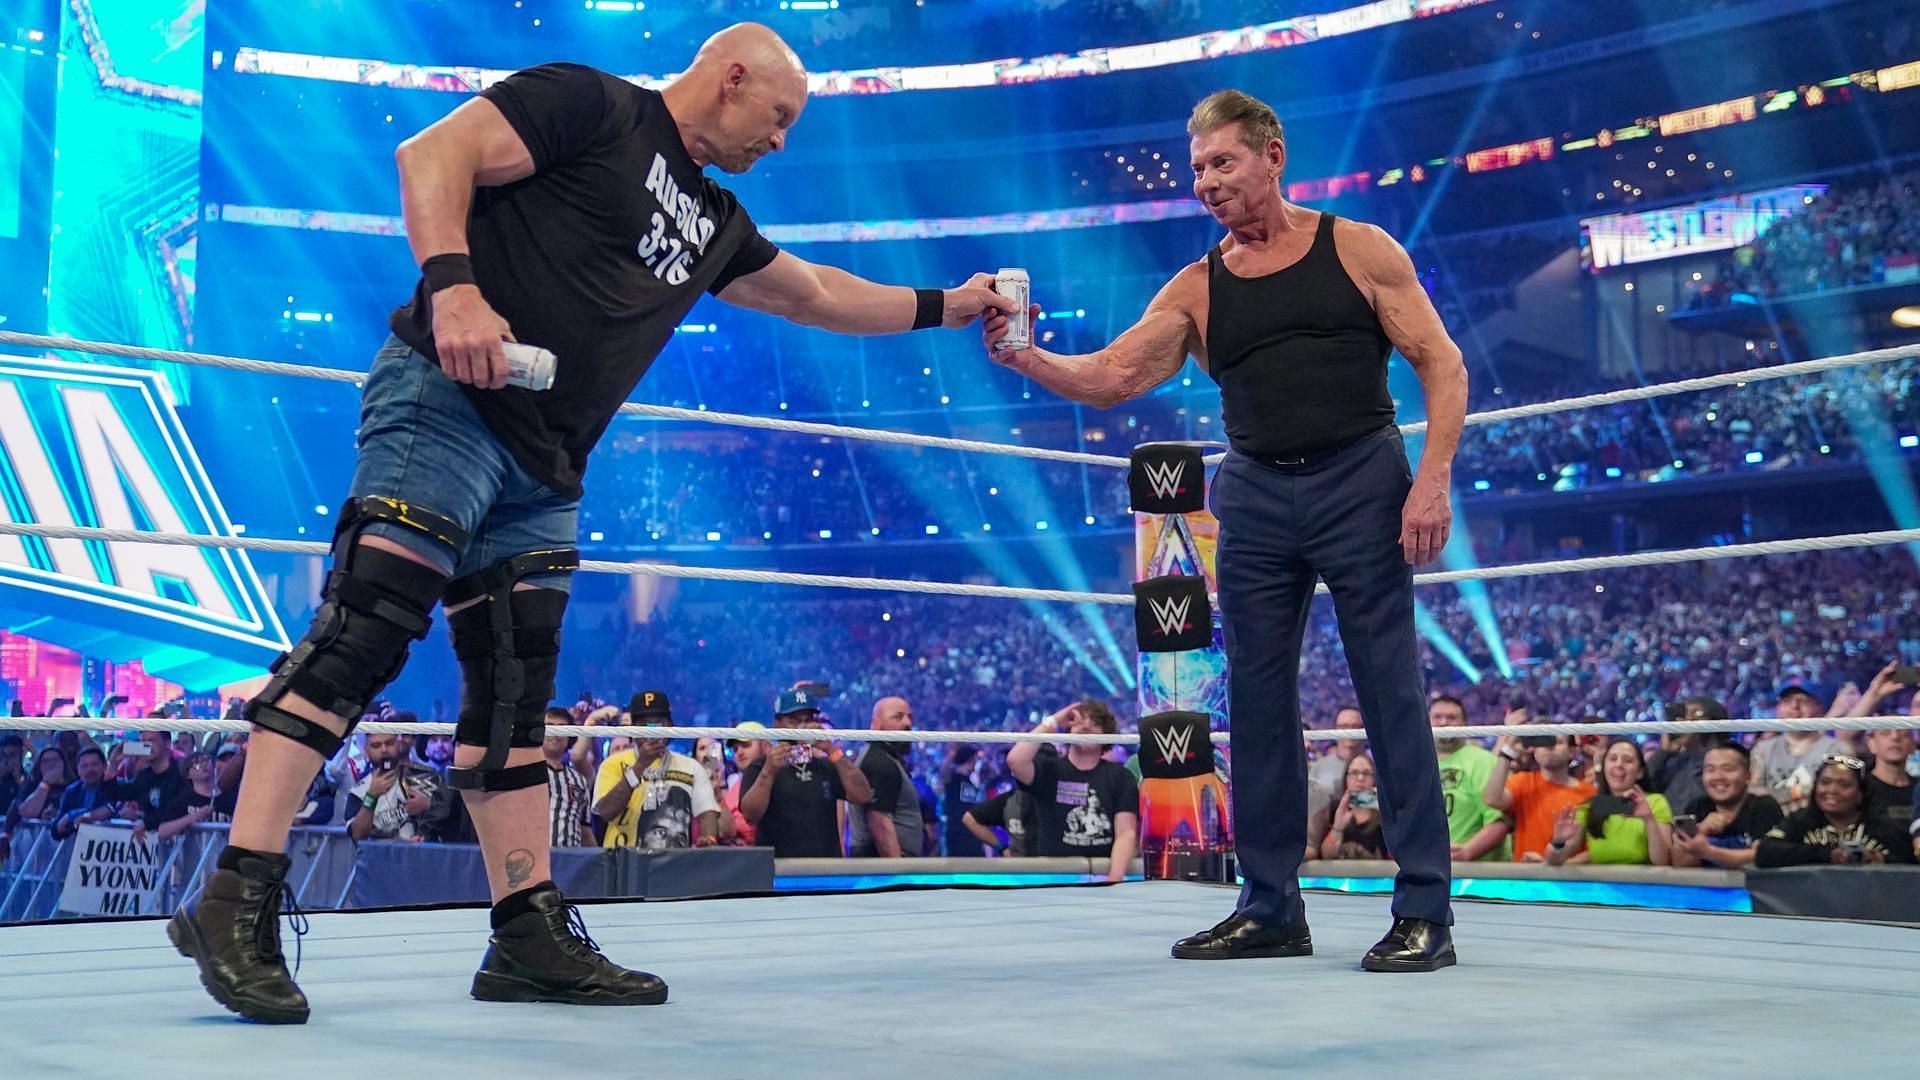 Stone Cold Steve Austin and Vince McMahon shared a beer at WWE WrestleMania 38.